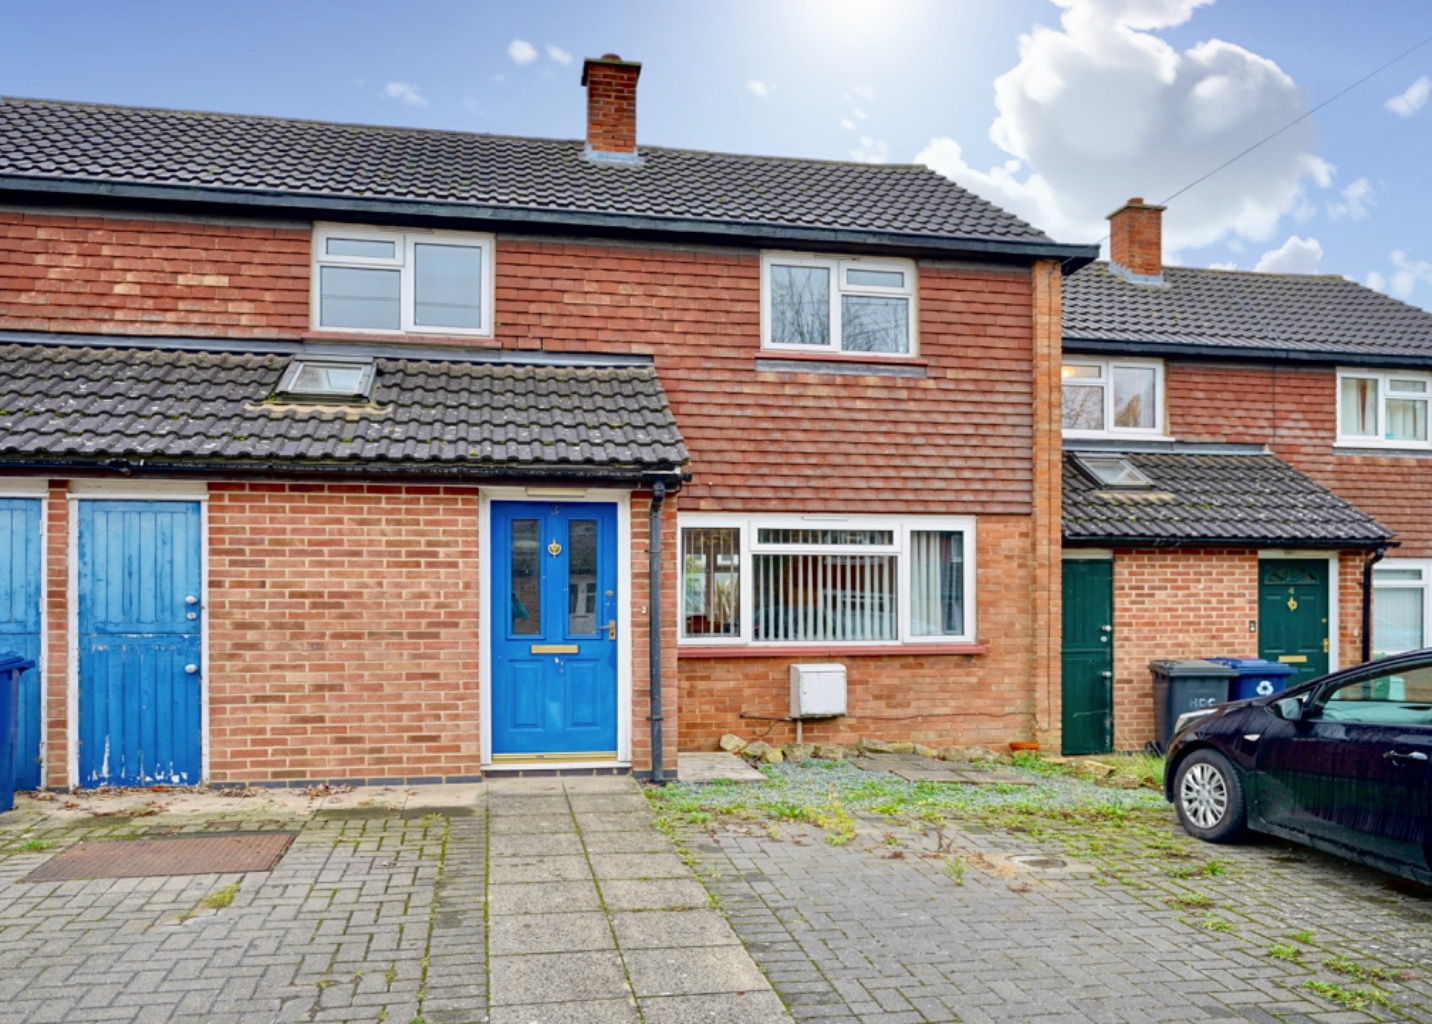 3 bed terraced house for sale in Dorset Close, Huntingdon, PE28